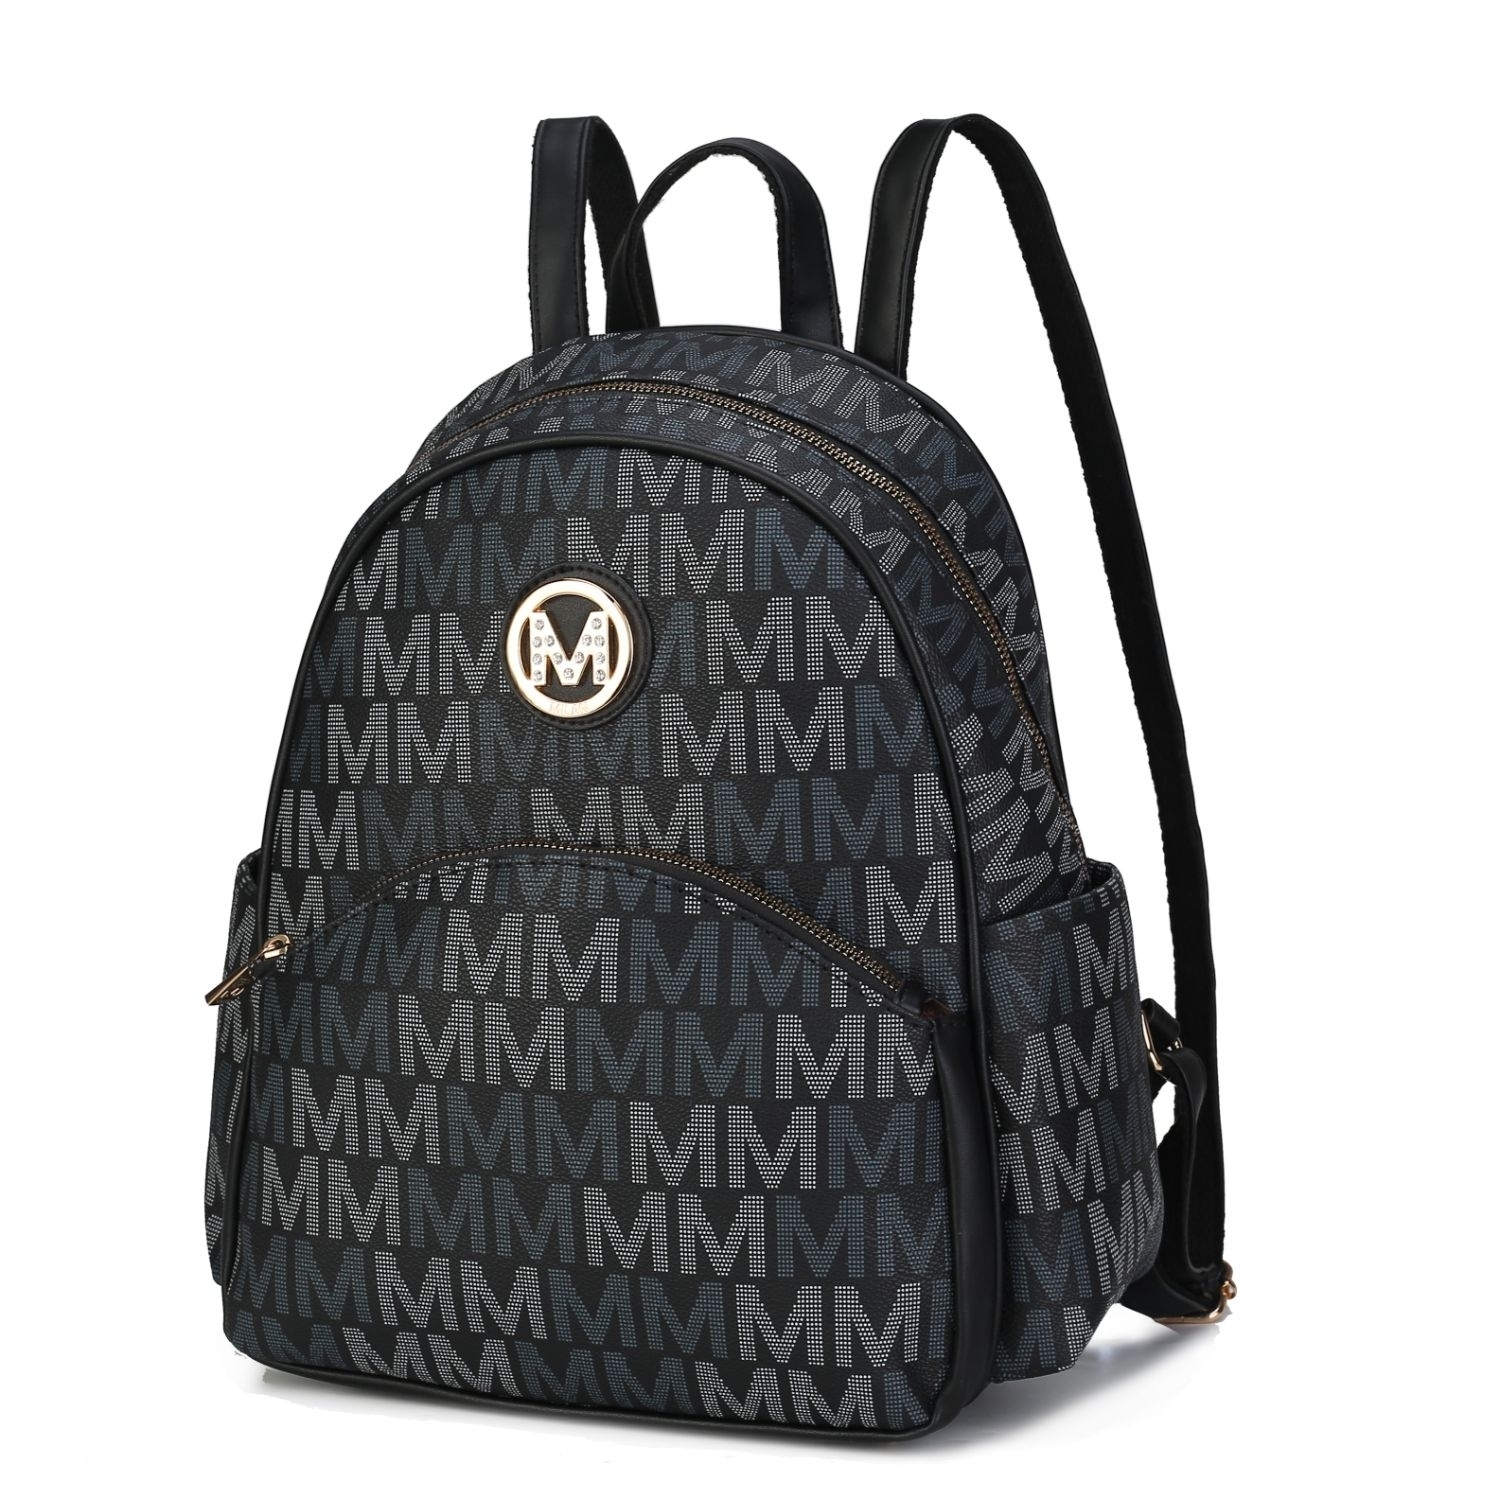 MKF Collection Palmer Vegan Leather Signature Logo-print Women's Backpack By Mia K - Beige